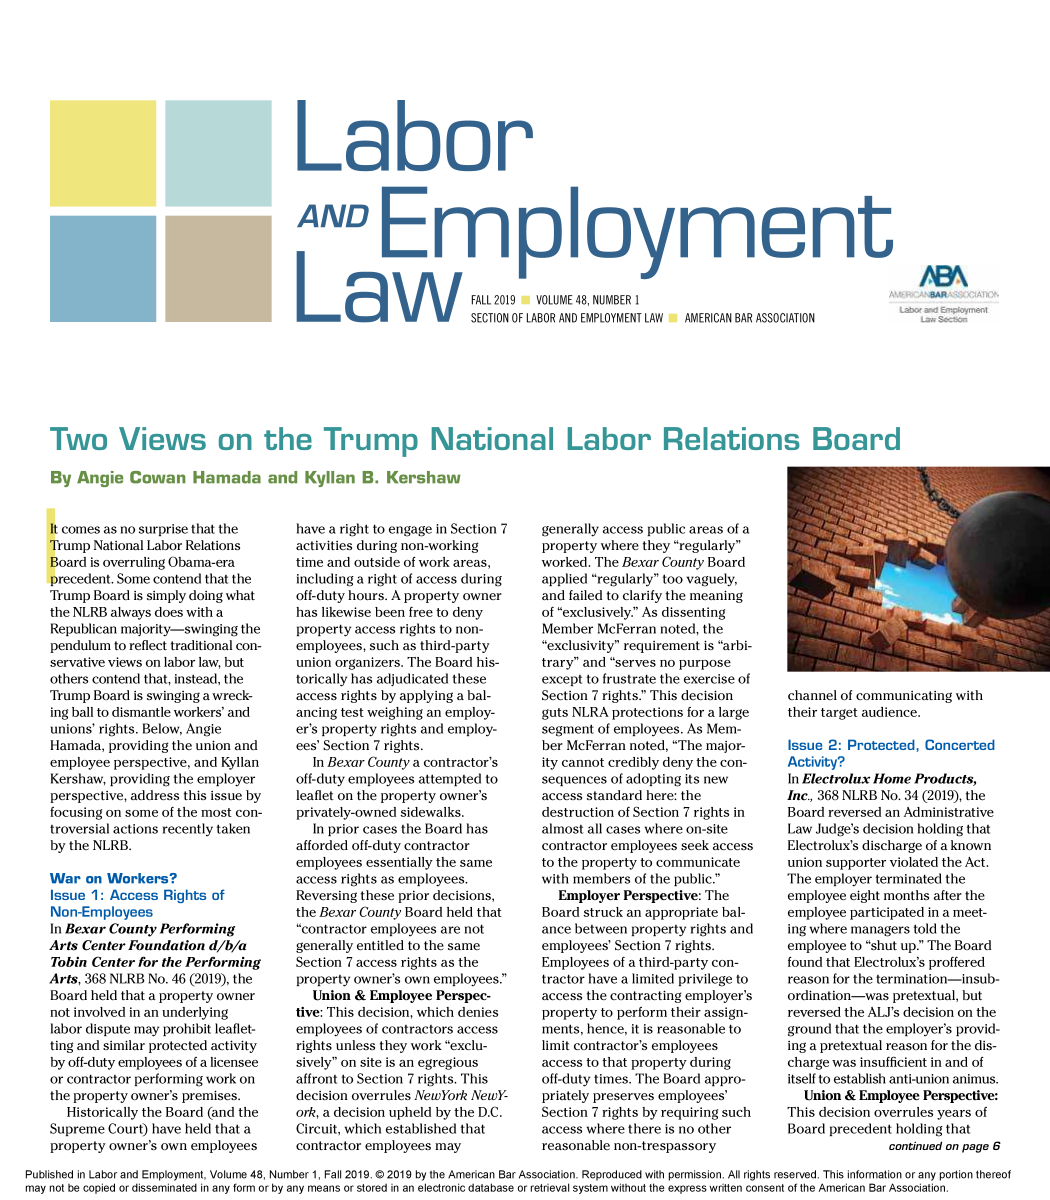 handle is hein.journals/laboemplo48 and id is 1 raw text is: 














AND Epomn


FALL 2019 VOLUME 48, NUMBER 1
SECTION OF LABOR AND EMPLOYMENT LAW


By  Angie  Cowan Hamada and Kyllan B. Kershaw


AMERICAN BAR ASSOCIATION


It comes as no surprise that the
Trump National Labor Relations
Board is overruling Obama-era
precedent. Some contend that the
Trump Board is simply doing what
the NLRB always does with a
Republican majority-swinging the
pendulum to reflect traditional con-
servative views on labor law, but
others contend that, instead, the
Trump Board is swinging a wreck-
ing ball to dismantle workers' and
unions' rights. Below, Angie
Hamada,  providing the union and
employee perspective, and Kyllan
Kershaw, providing the employer
perspective, address this issue by
focusing on some of the most con-
troversial actions recently taken
by the NLRB.

War  on Workers?
Issue 1: Access  Rights of
Non-Employees
In Bexar County Performing
Arts Center Foundation d/b/a
Tobin Center for the Performing
Arts, 368 NLRB No. 46 (2019), the
Board held that a property owner
not involved in an underlying
labor dispute may prohibit leaflet-
ting and similar protected activity
by off-duty employees of a licensee
or contractor performing work on
the property owner's premises.
   Historically the Board (and the
Supreme  Court) have held that a
property owner's own employees


have a right to engage in Section 7
activities during non-working
time and outside of work areas,
including a right of access during
off-duty hours. A property owner
has likewise been free to deny
property access rights to non-
employees, such as third-party
union organizers. The Board his-
torically has adjudicated these
access rights by applying a bal-
ancing test weighing an employ-
er's property rights and employ-
ees' Section 7 rights.
  In Bexar County a contractor's
off-duty employees attempted to
leaflet on the property owner's
privately-owned sidewalks.
  In prior cases the Board has
afforded off-duty contractor
employees essentially the same
access rights as employees.
Reversing these prior decisions,
the Bexar County Board held that
contractor employees are not
generally entitled to the same
Section 7 access rights as the
property owner's own employees.
  Union &  Employee Perspec-
tive: This decision, which denies
employees of contractors access
rights unless they work exclu-
sively on site is an egregious
affront to Section 7 rights. This
decision overrules NewYork NewY-
ork, a decision upheld by the D.C.
Circuit, which established that
contractor employees may


generally access public areas of a
property where they regularly
worked. The Bexar County Board
applied regularly too vaguely,
and failed to clarify the meaning
of exclusively. As dissenting
Member  McFerran noted, the
exclusivity requirement is arbi-
trary and serves no purpose
except to frustrate the exercise of
Section 7 rights. This decision
guts NLRA protections for a large
segment of employees. As Mem-
ber McFerran noted, The major-
ity cannot credibly deny the con-
sequences of adopting its new
access standard here: the
destruction of Section 7 rights in
almost all cases where on-site
contractor employees seek access
to the property to communicate
with members of the public.
  Employer  Perspective: The
Board struck an appropriate bal-
ance between property rights and
employees' Section 7 rights.
Employees of a third-party con-
tractor have a limited privilege to
access the contracting employer's
property to perform their assign-
ments, hence, it is reasonable to
limit contractor's employees
access to that property during
off-duty times. The Board appro-
priately preserves employees'
Section 7 rights by requiring such
access where there is no other
reasonable non-trespassory


channel of communicating with
their target audience.

Issue 2: Protected, Concerted
Activity?
In Electrolux Home Products,
Inc., 368 NLRB No. 34 (2019), the
Board reversed an Administrative
Law Judge's decision holding that
Electrolux's discharge of a known
union supporter violated the Act.
The employer terminated the
employee eight months after the
employee participated in a meet-
ing where managers told the
employee to shut up. The Board
found that Electrolux's proffered
reason for the termination-insub-
ordination-was pretextual, but
reversed the ALJ's decision on the
ground that the employer's provid-
ing a pretextual reason for the dis-
charge was insufficient in and of
itself to establish anti-union animus.
  Union & Employee  Perspective:
This decision overrules years of
Board precedent holding that
               continued on page 6


Published in Labor and Employment, Volume 48, Number 1, Fall 2019. © 2019 by the American Bar Association. Reproduced with permission. All rights reserved. This information or any portion thereof
may not be copied or disseminated in any form or by any means or stored in an electronic database or retrieval system without the express written consent of the American Bar Association.


Two Views on the Trn


ip National Labor Relation


